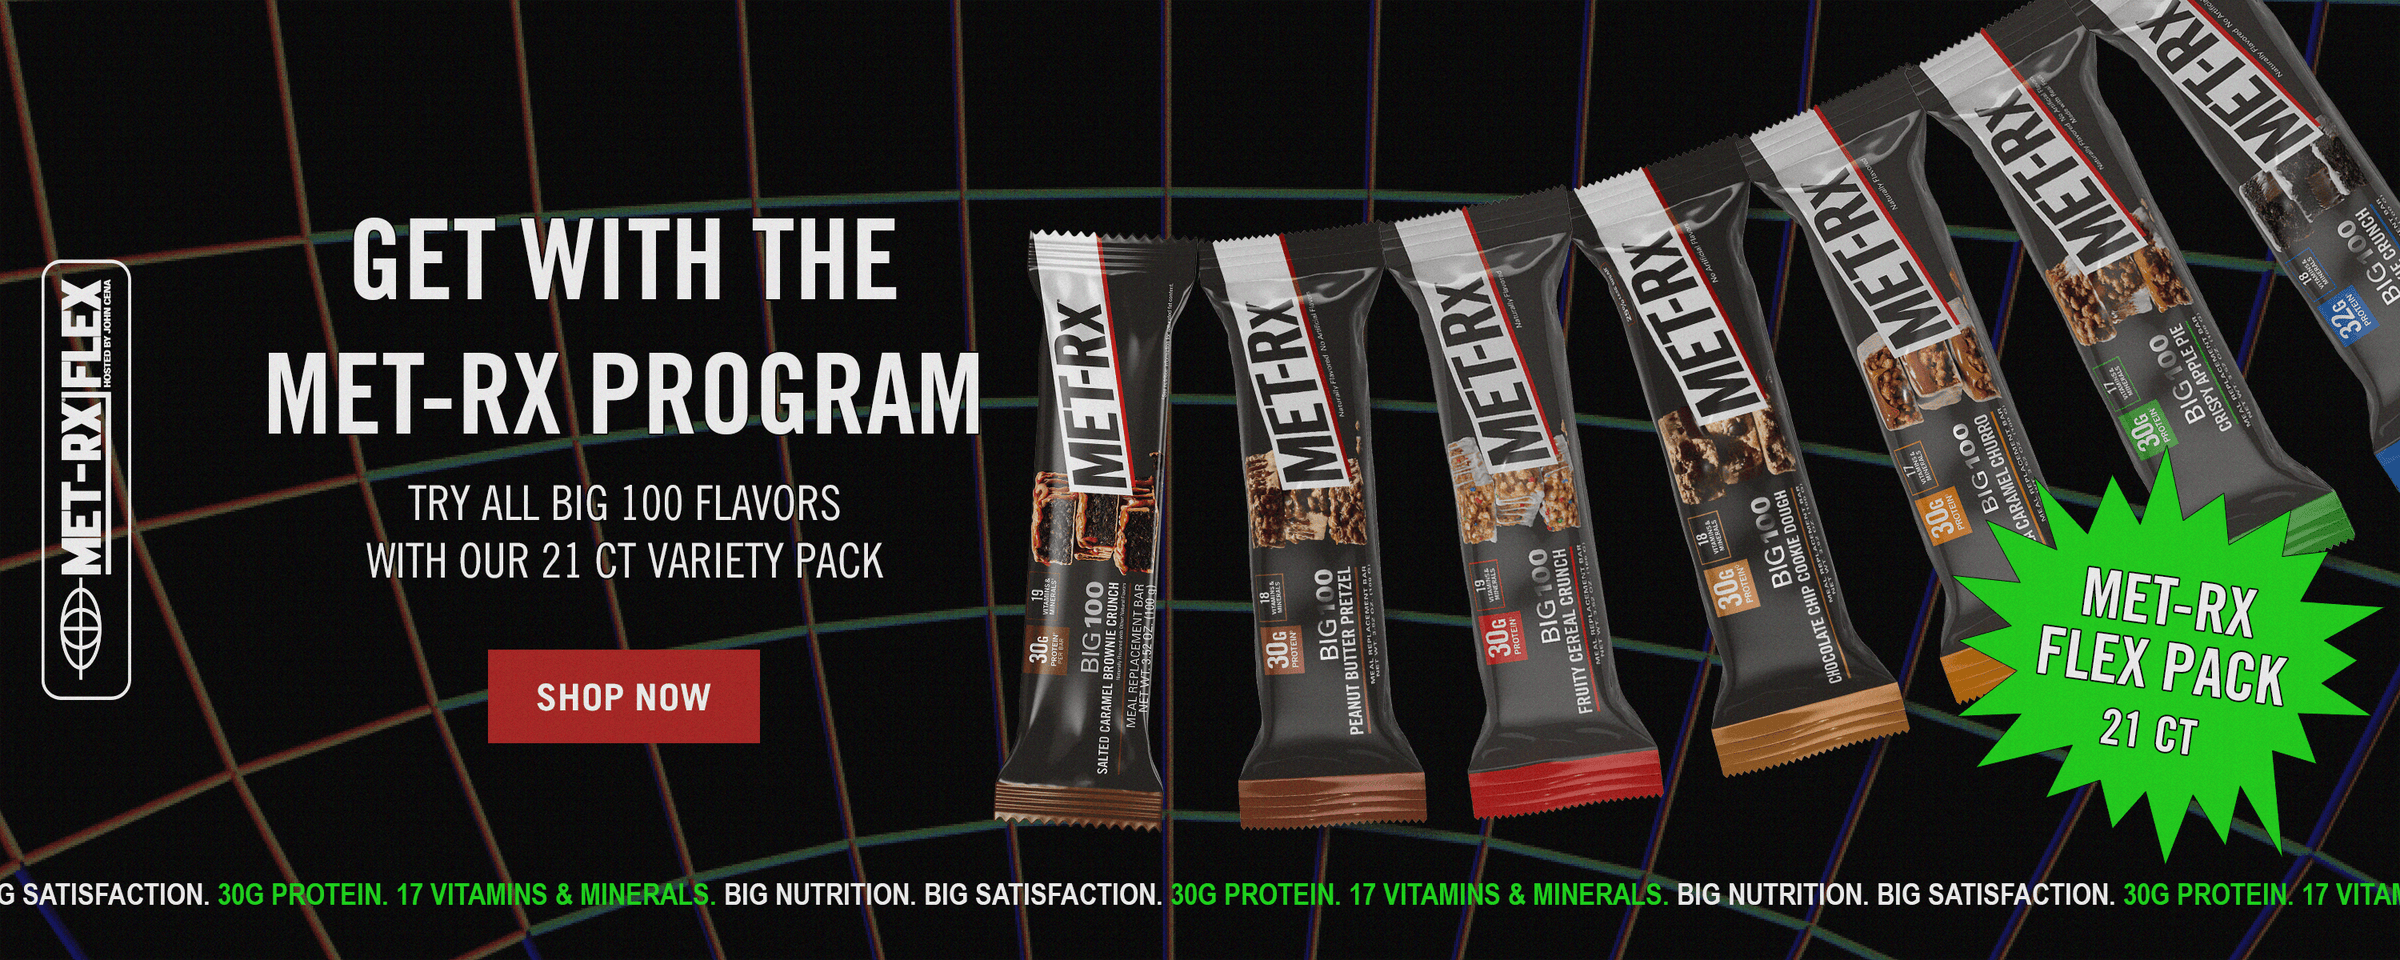 Met-Rx Flex. Get with the MET-Rx Program. TRY ALL BIG 100 FLAVORS WITH OUR 21 CT VARIETY PACK. Met-Rx Flex Pack, 21 ct. 30G PROTEIN. 17 Vitamins & Minerals BIG NUTRITION. BIG SATISFACTION.